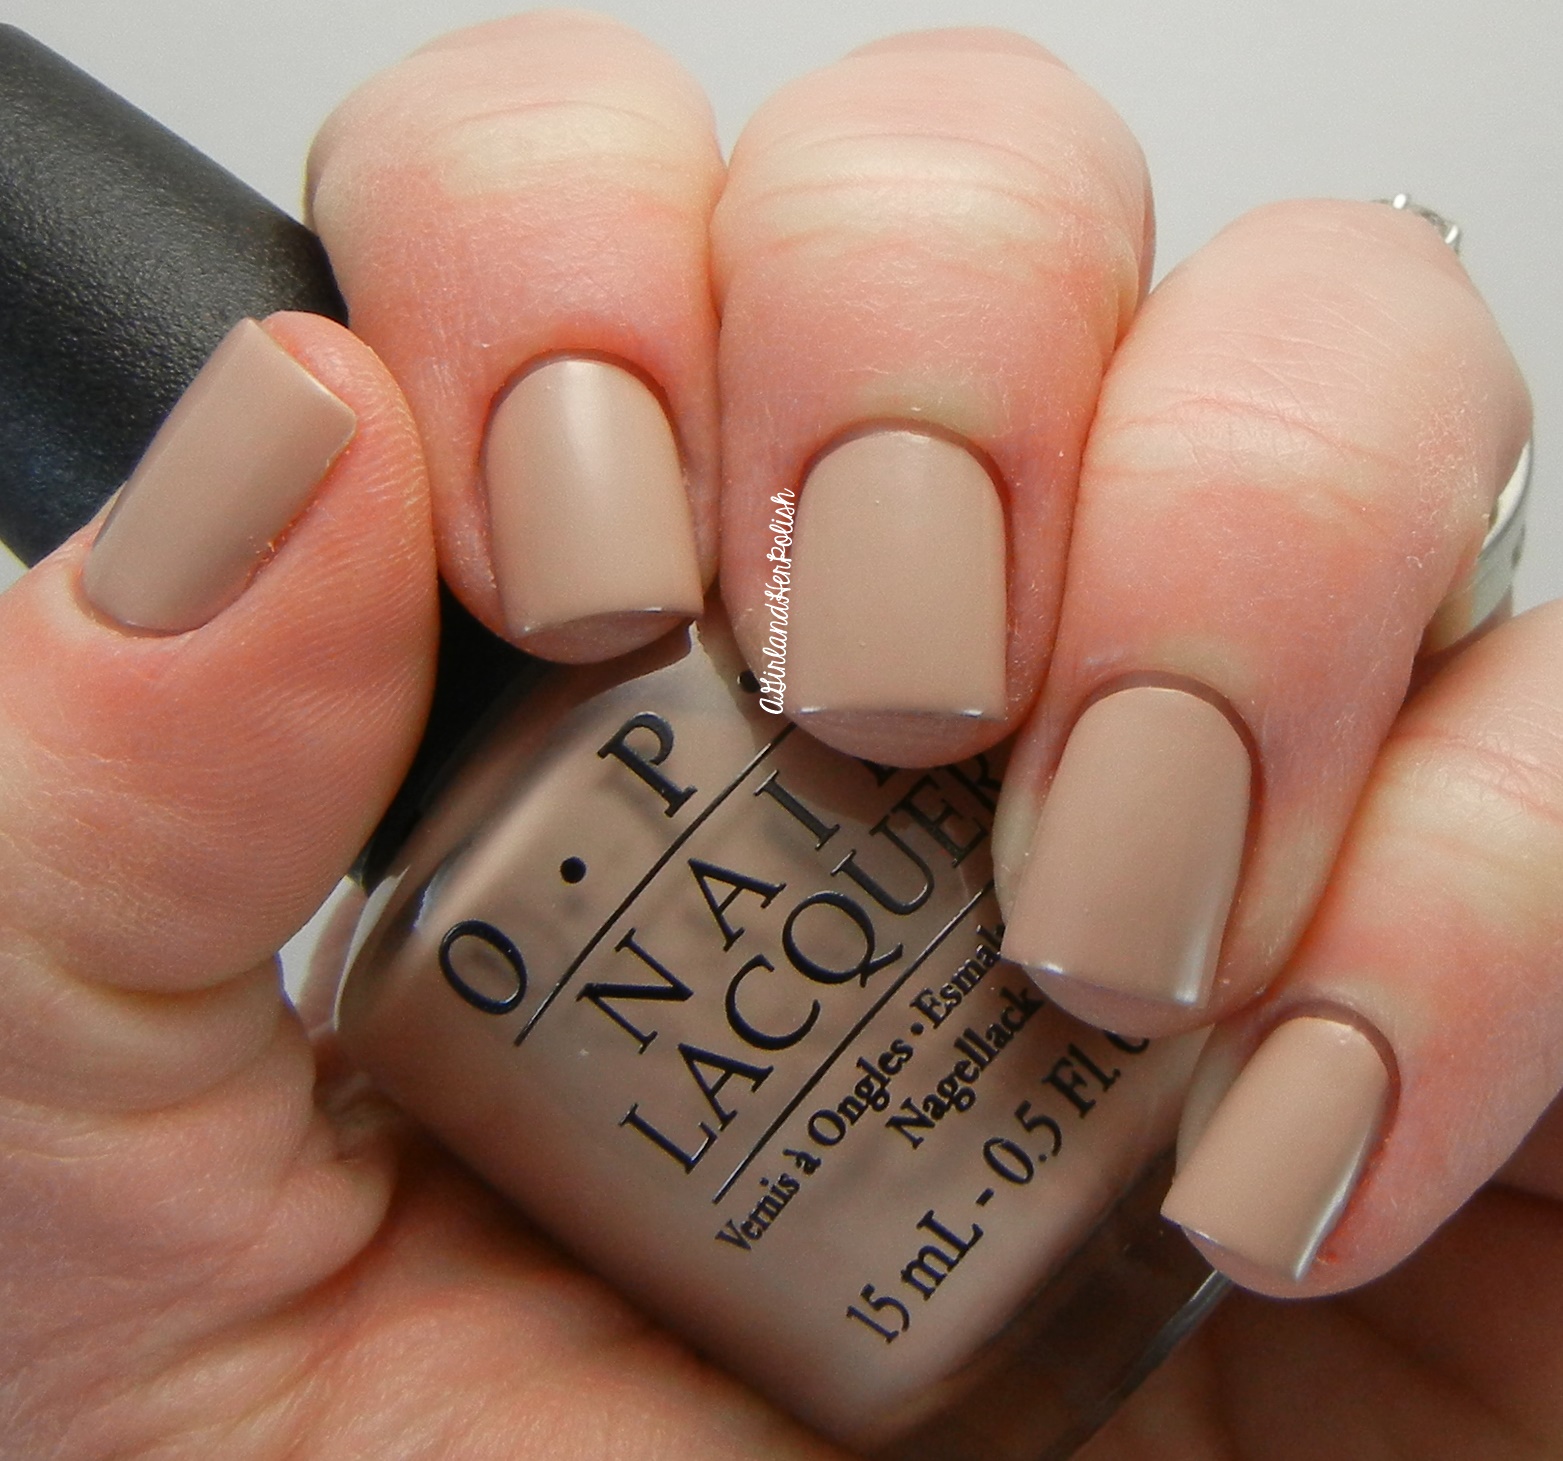 A Girl and Her Polish: Relay For Life Nails1563 x 1461